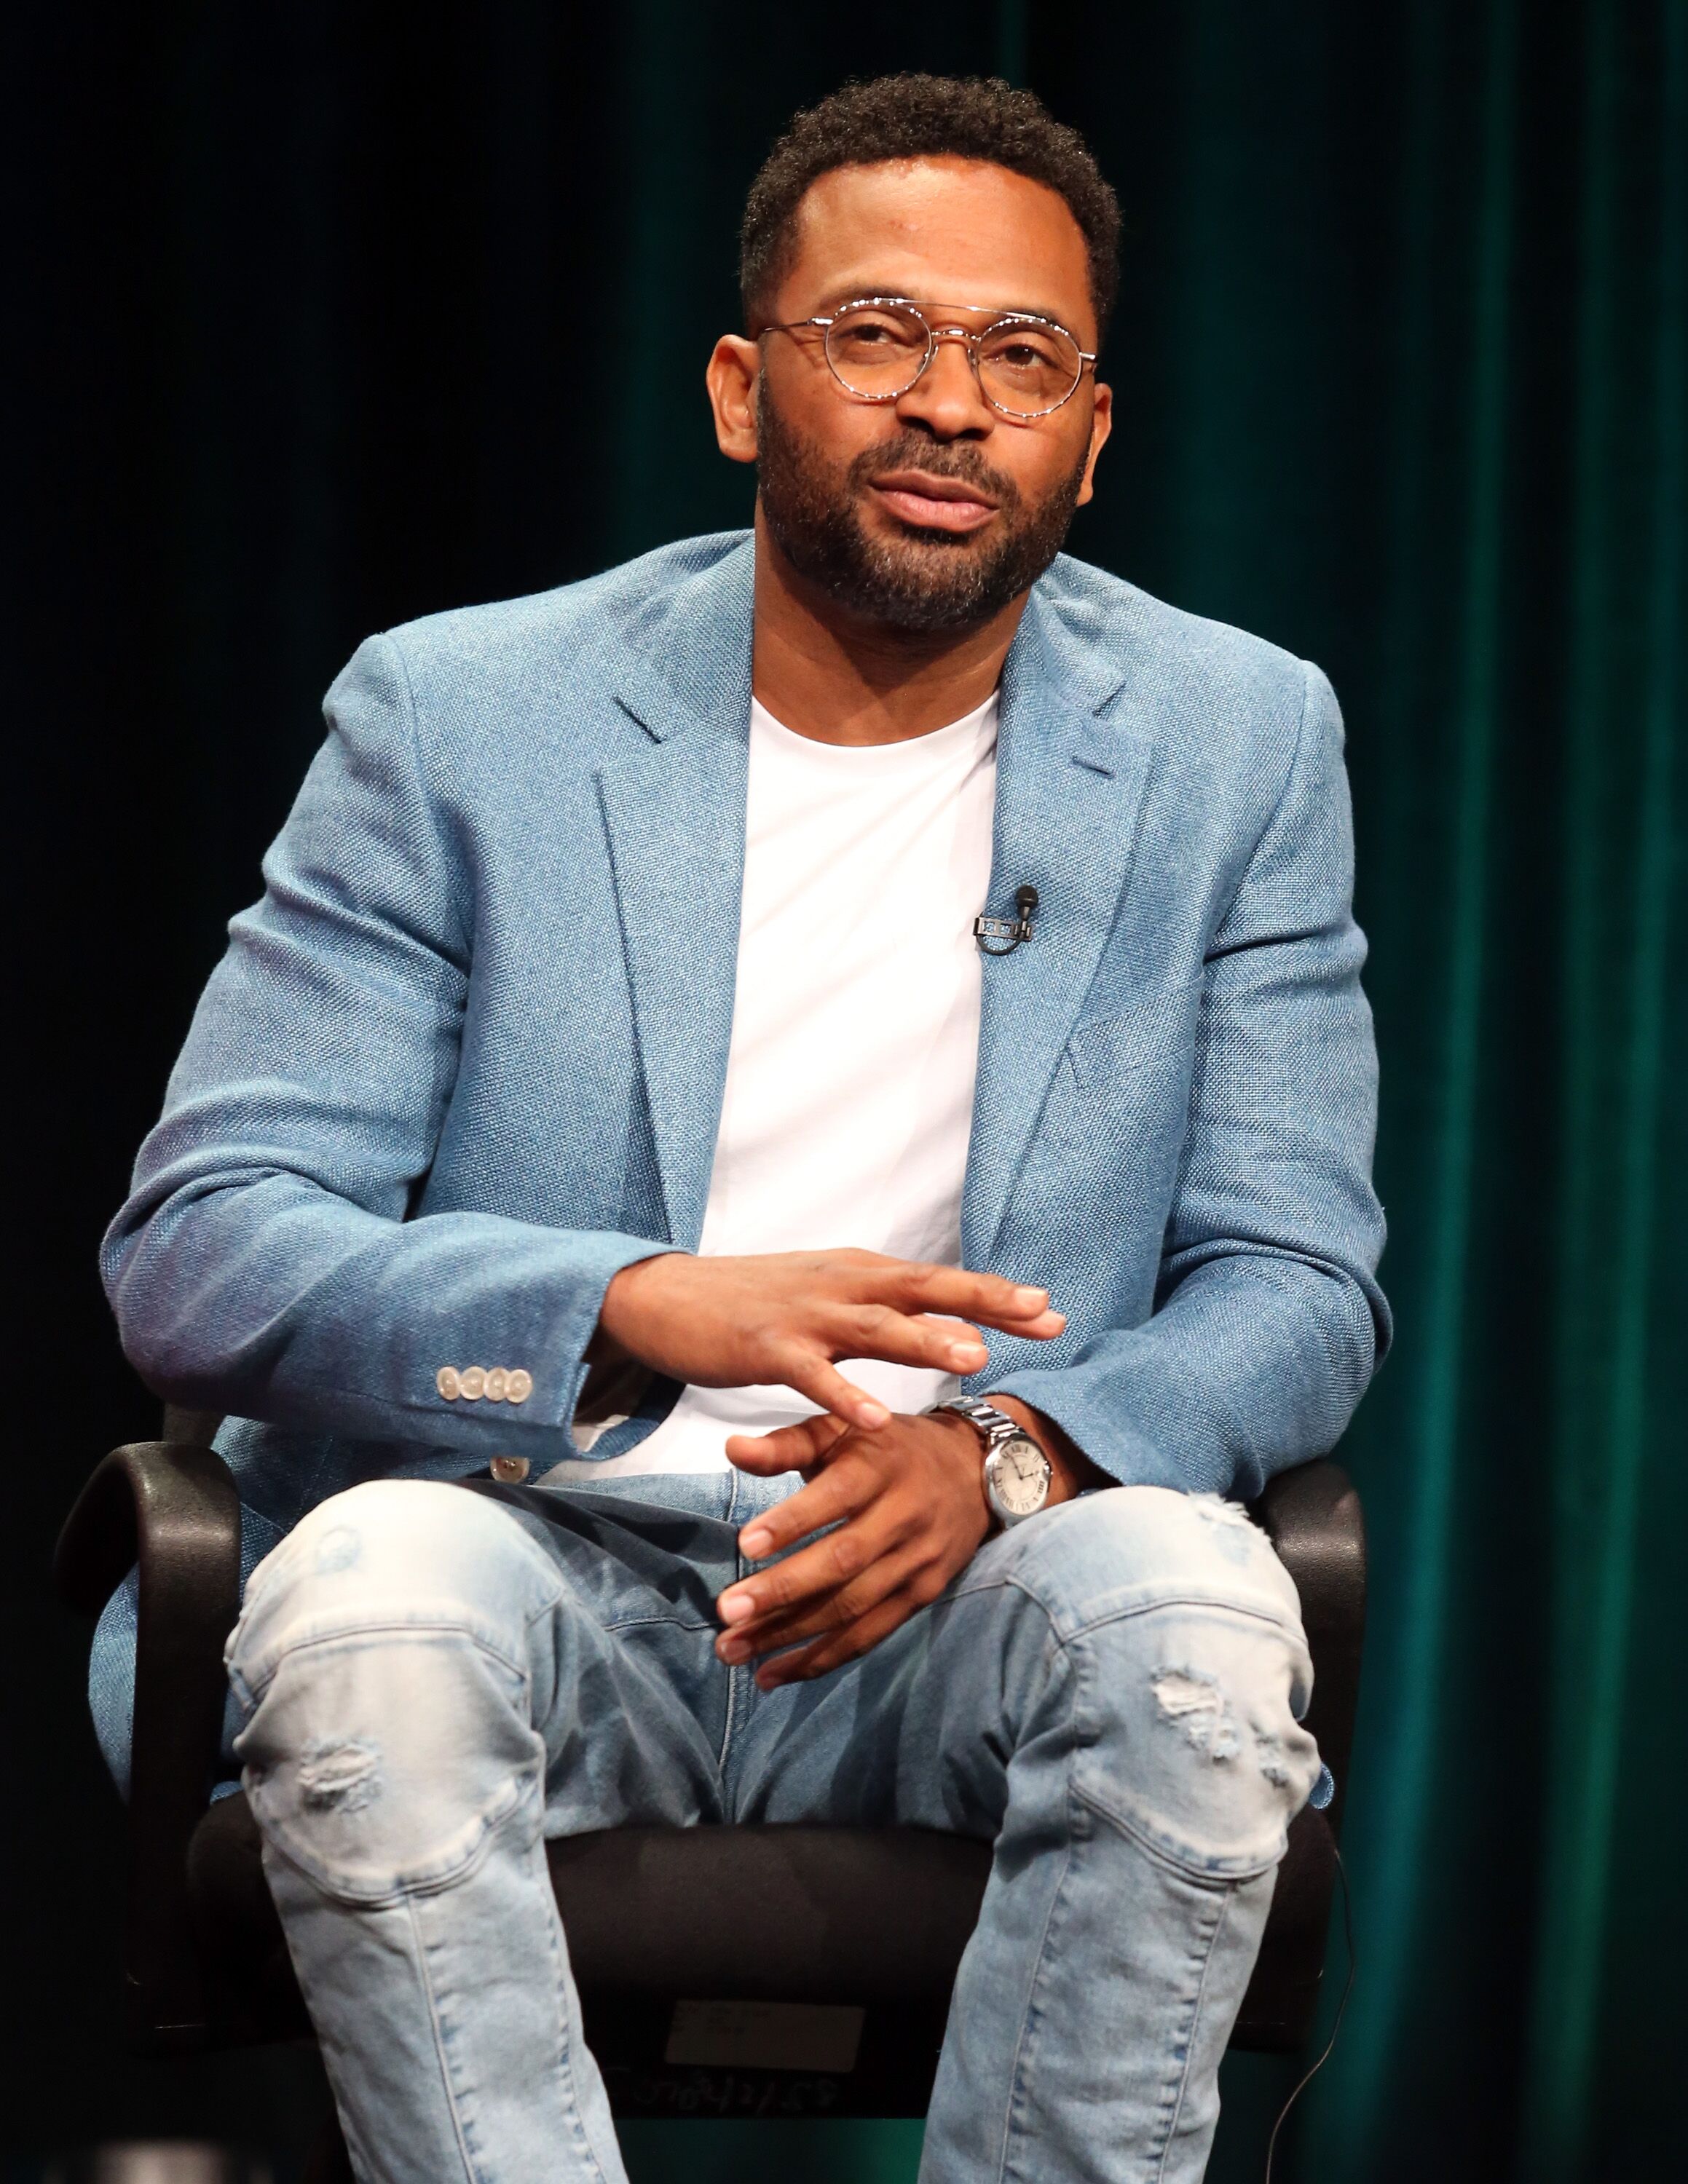 Mike Epps speaks onstage during the 'Survivor's Remorse' panel discussion at the STARZ portion of the 2015 Summer TCA Tour at The Beverly Hilton Hotel on July 31, 2015 in Beverly Hills, California. | Source: Getty Images